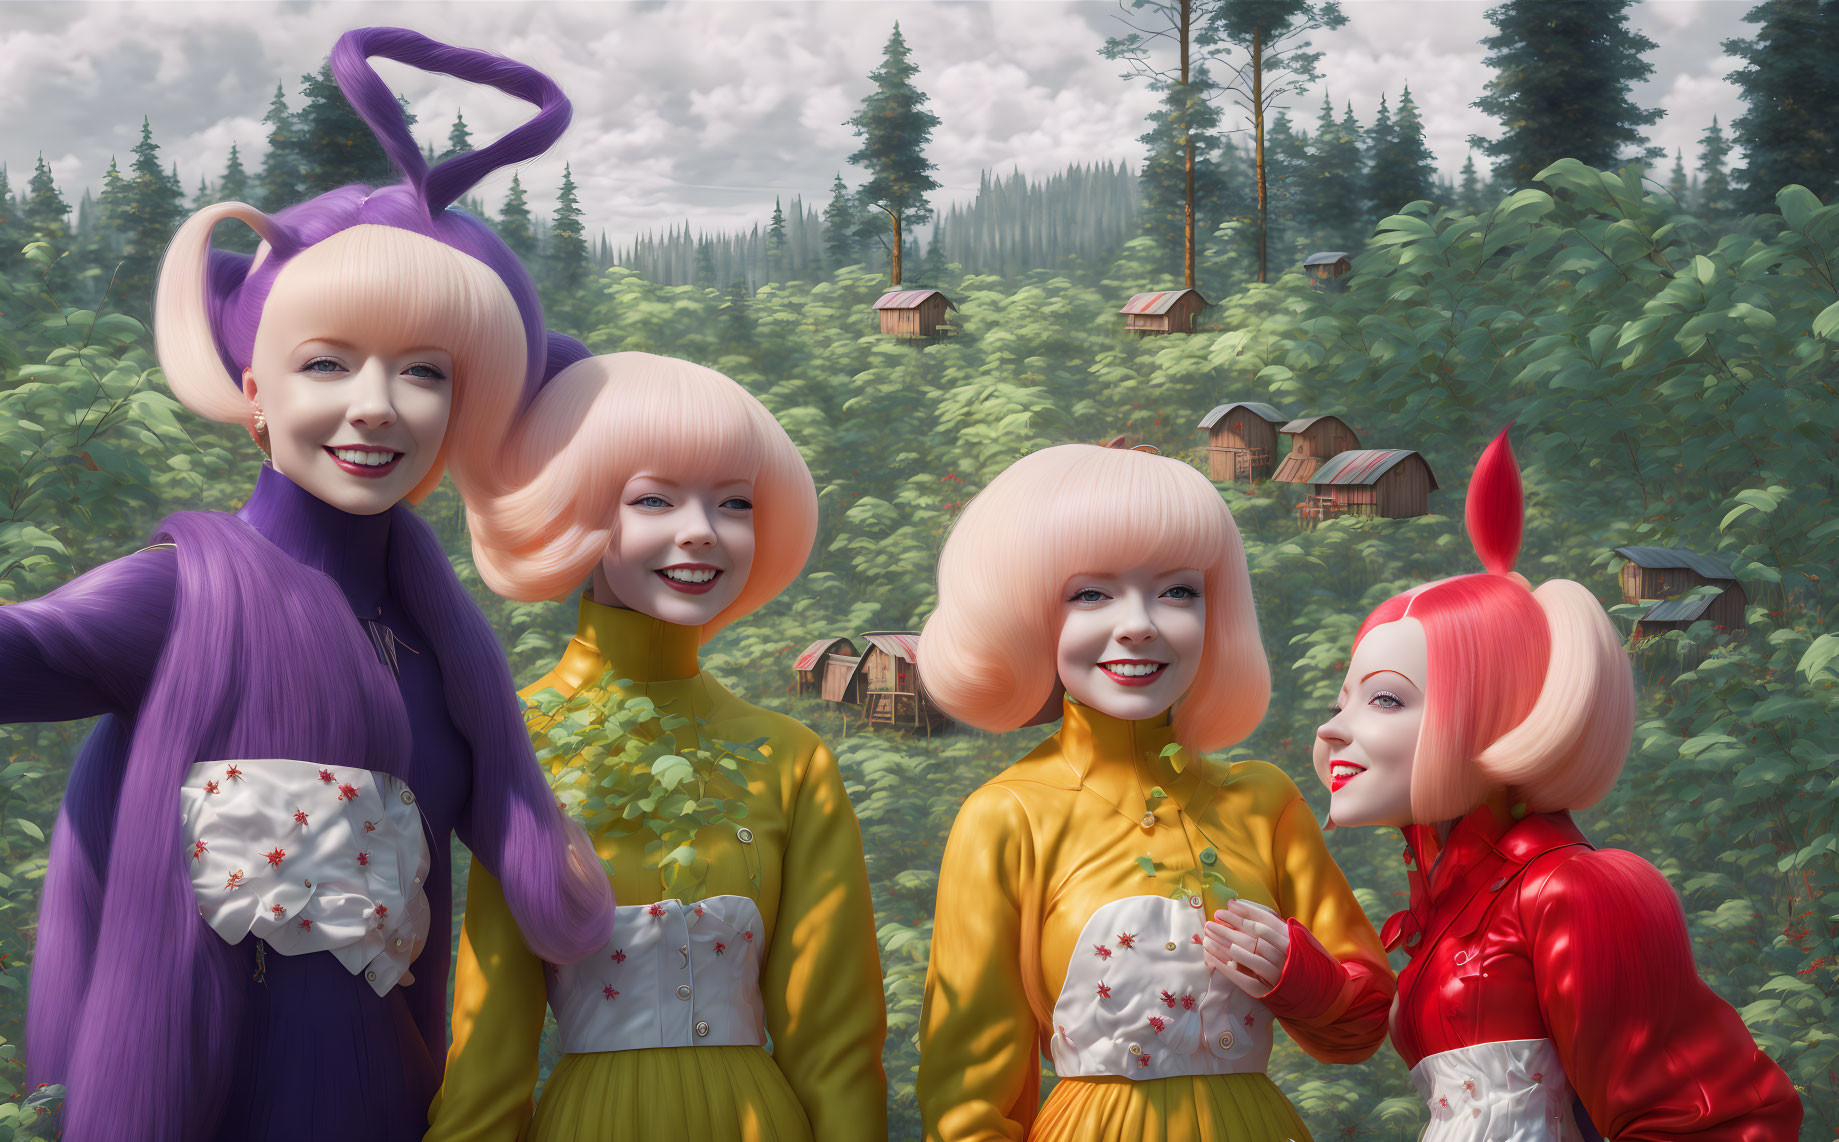 Four colorful-haired women in whimsical forest setting with small houses